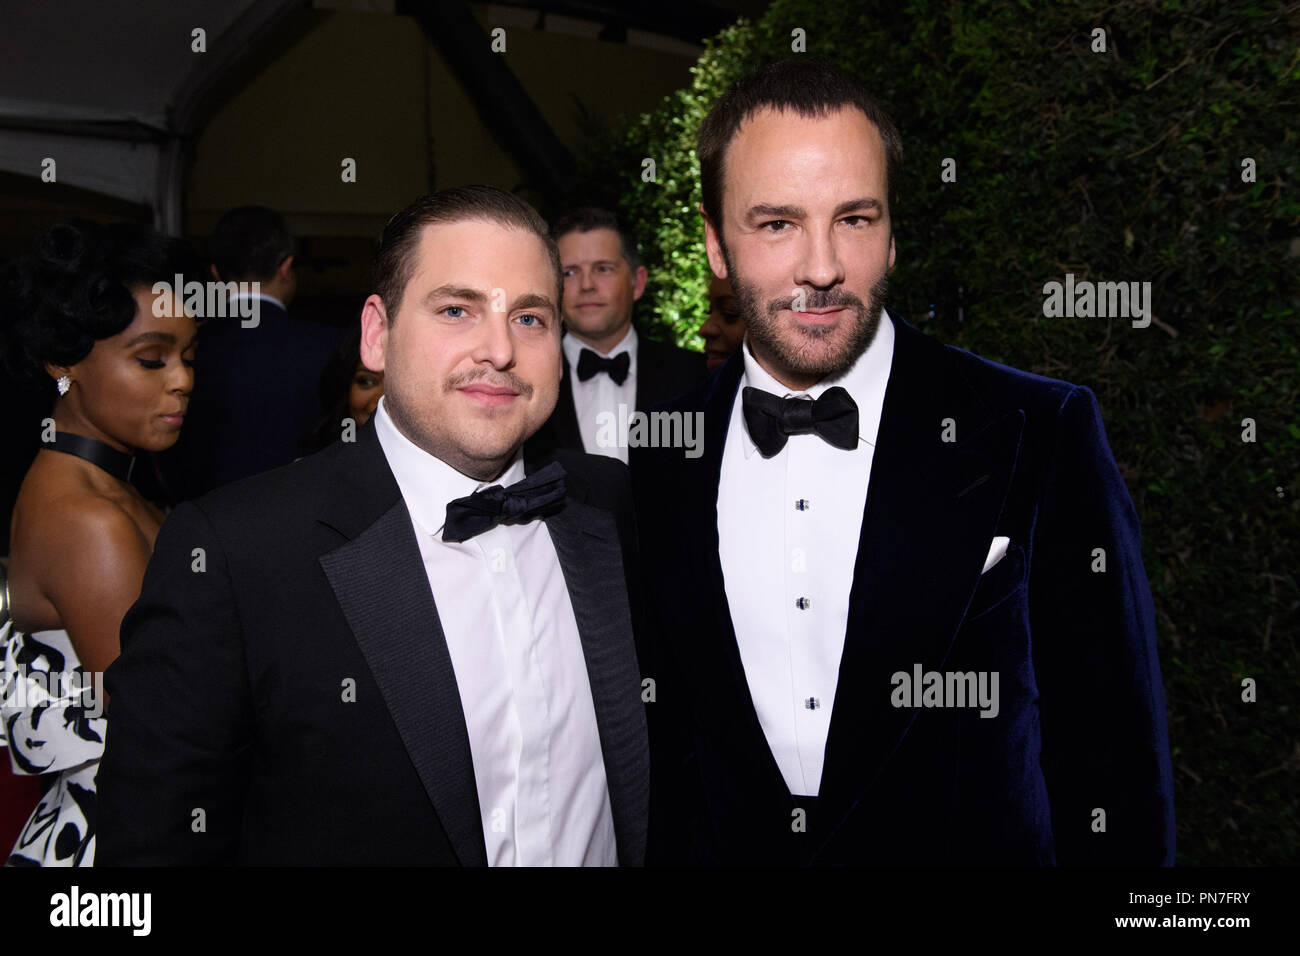 Jonah Hill (left) and Tom Ford attend the Academy’s 8th Annual Governors Awards in The Ray Dolby Ballroom at Hollywood & Highland Center® in Hollywood, CA, on Saturday, November 12, 2016.  File Reference # 33153 095THA  For Editorial Use Only -  All Rights Reserved Stock Photo